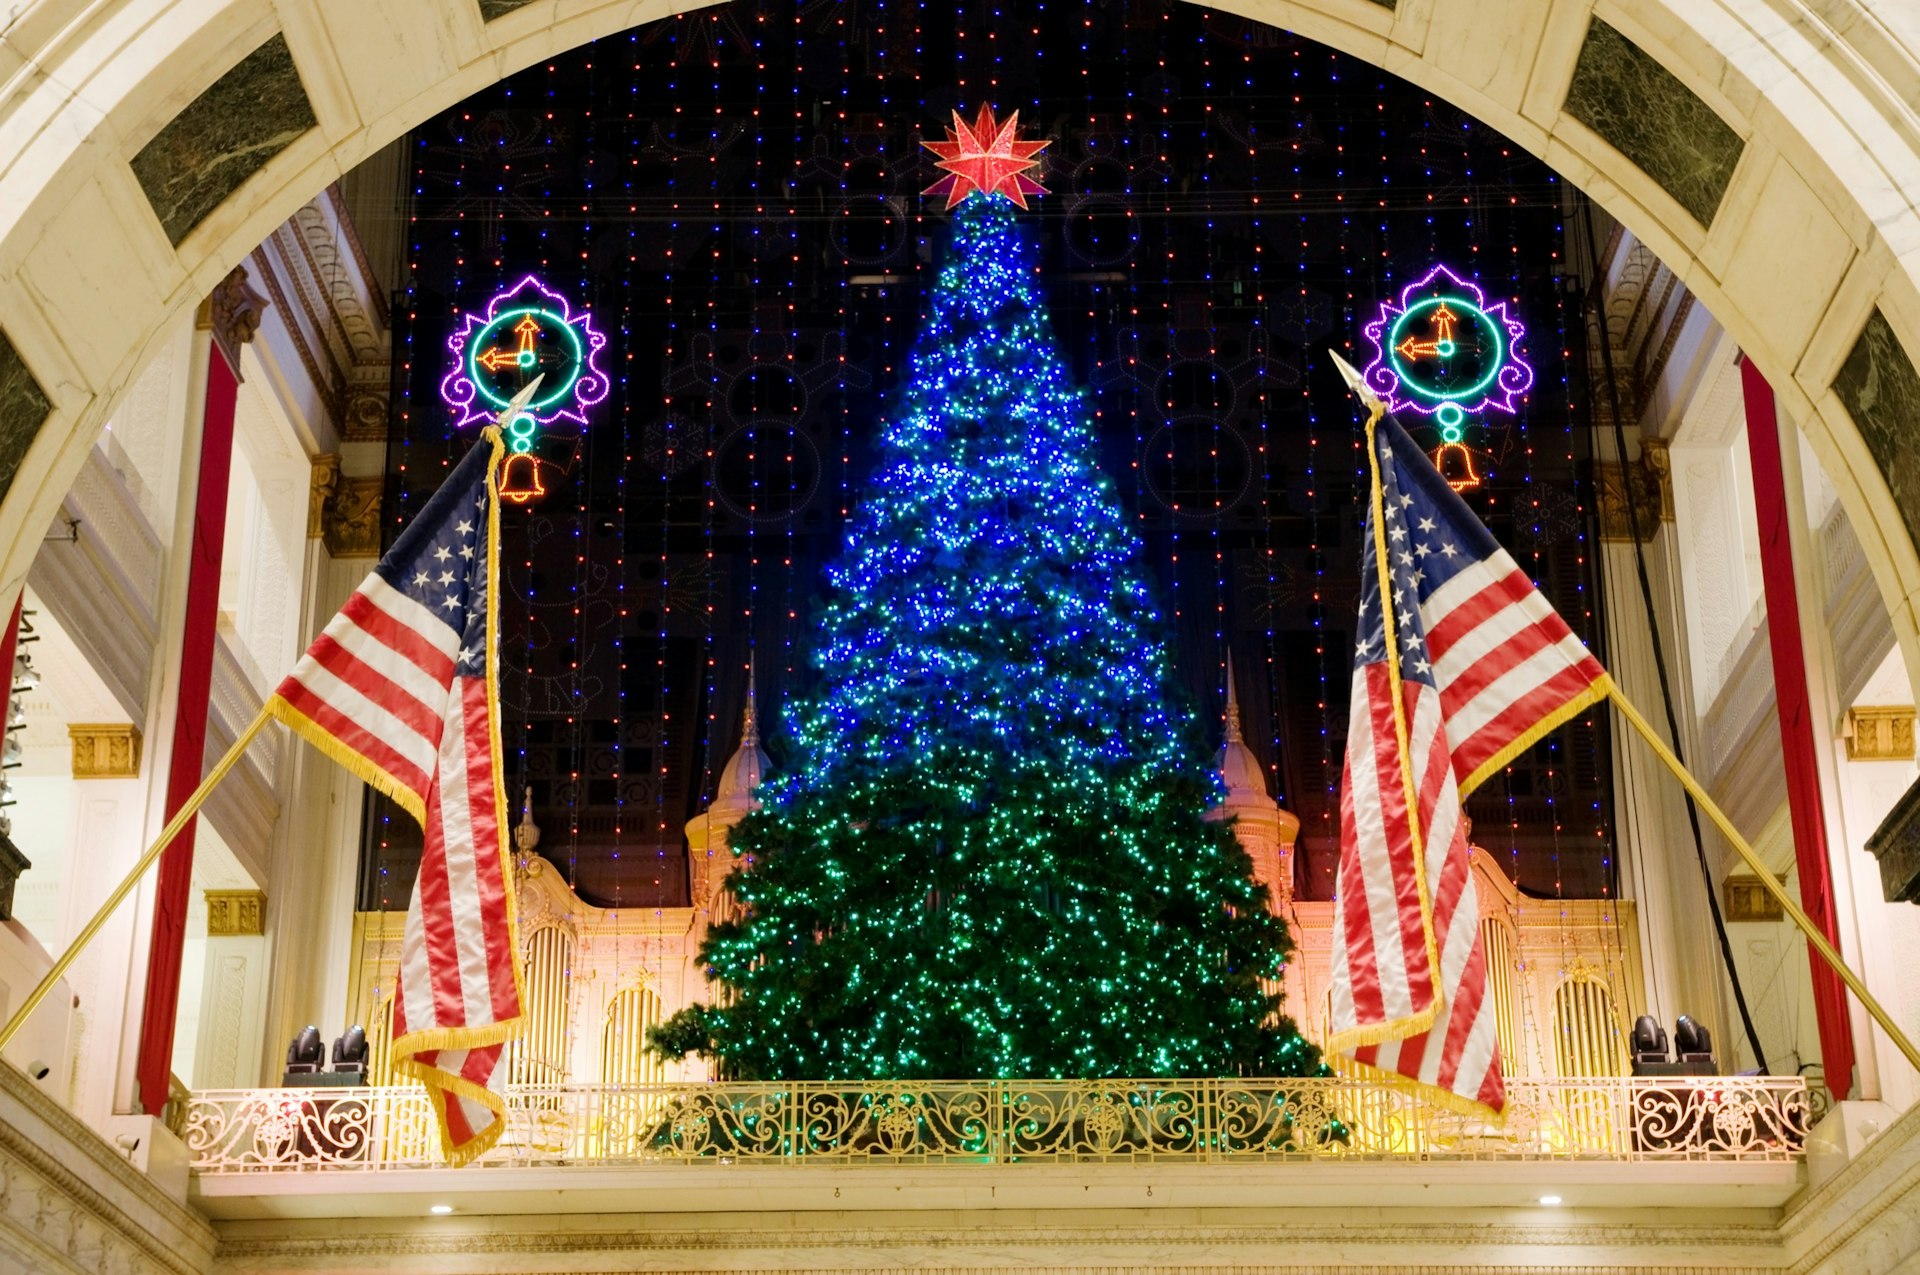 A large Christmas tree stands in front of a tapestry of LED lights in the atrium of a shopping mall in Philadelphia at Christmastime